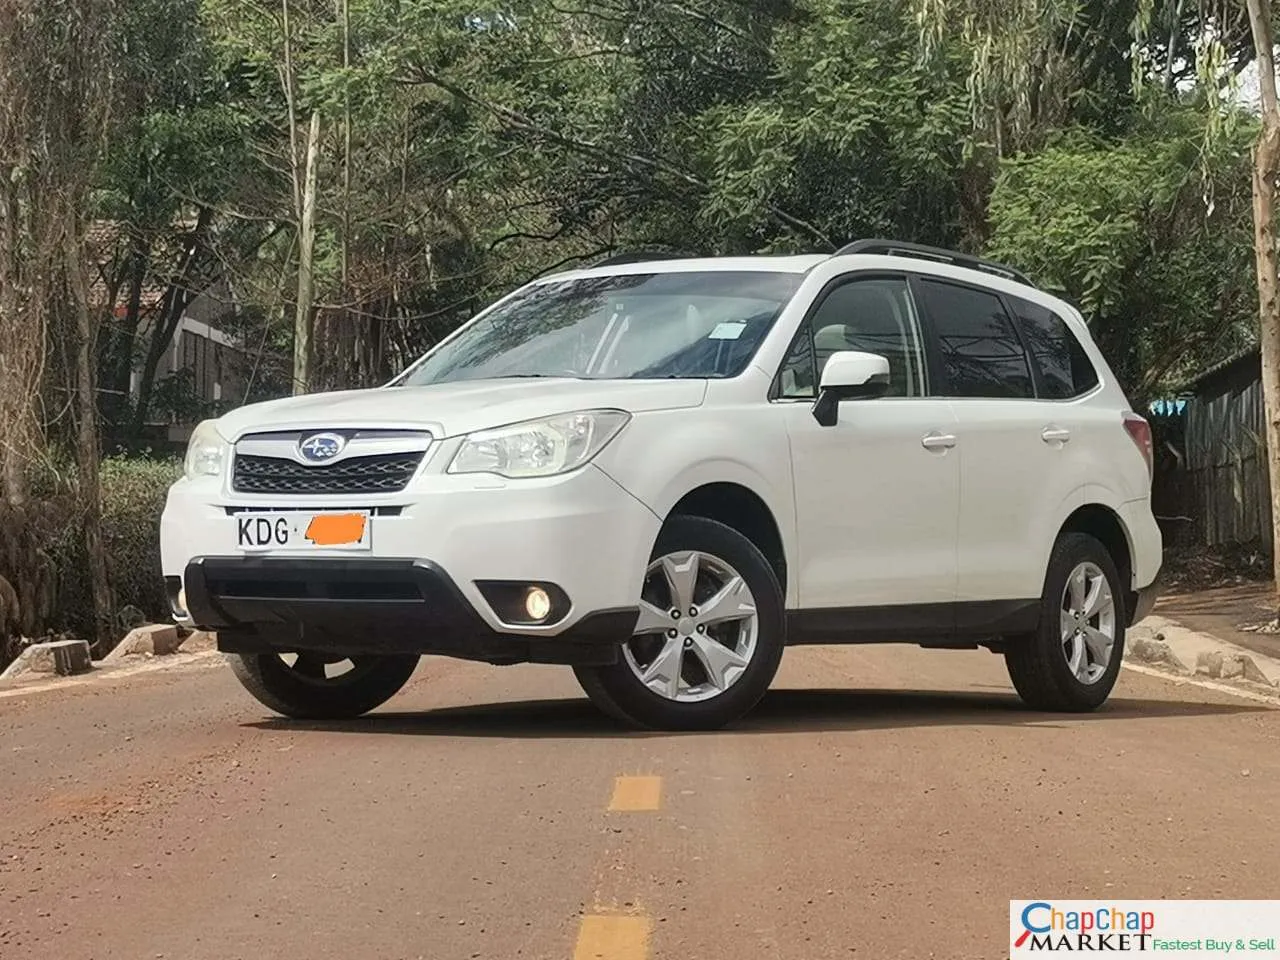 Cars Cars For Sale/Vehicles-Subaru Forester SUNROOF LEATHER Just ARRIVED 2.2M 🔥🔥 You Pay 30% Deposit Trade in OK EXCLUSIVE 9